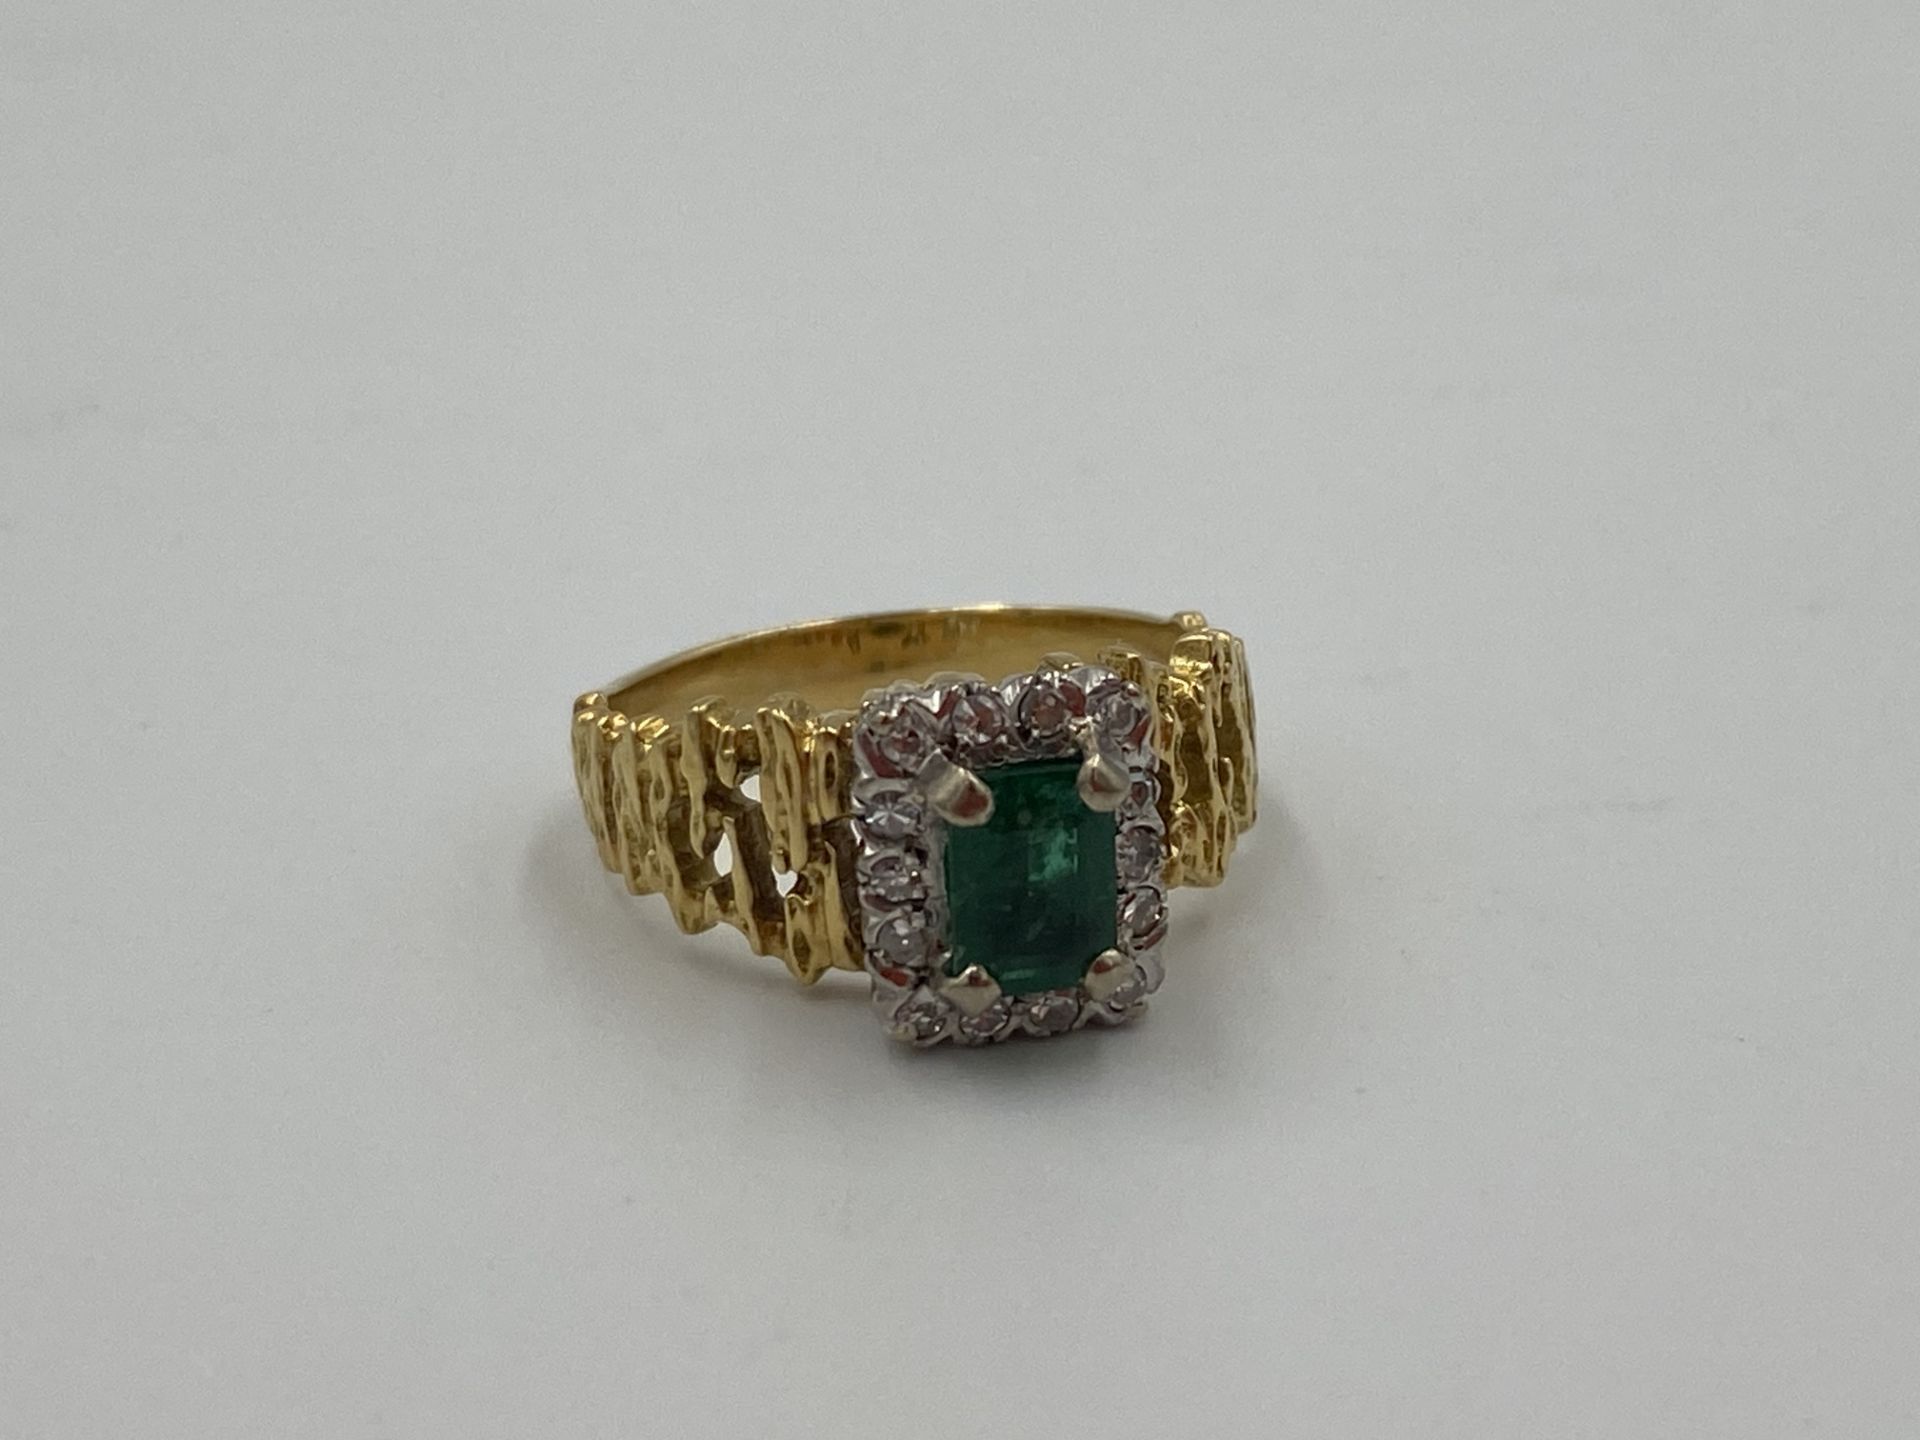 18ct gold, diamond and emerald ring - Image 2 of 6